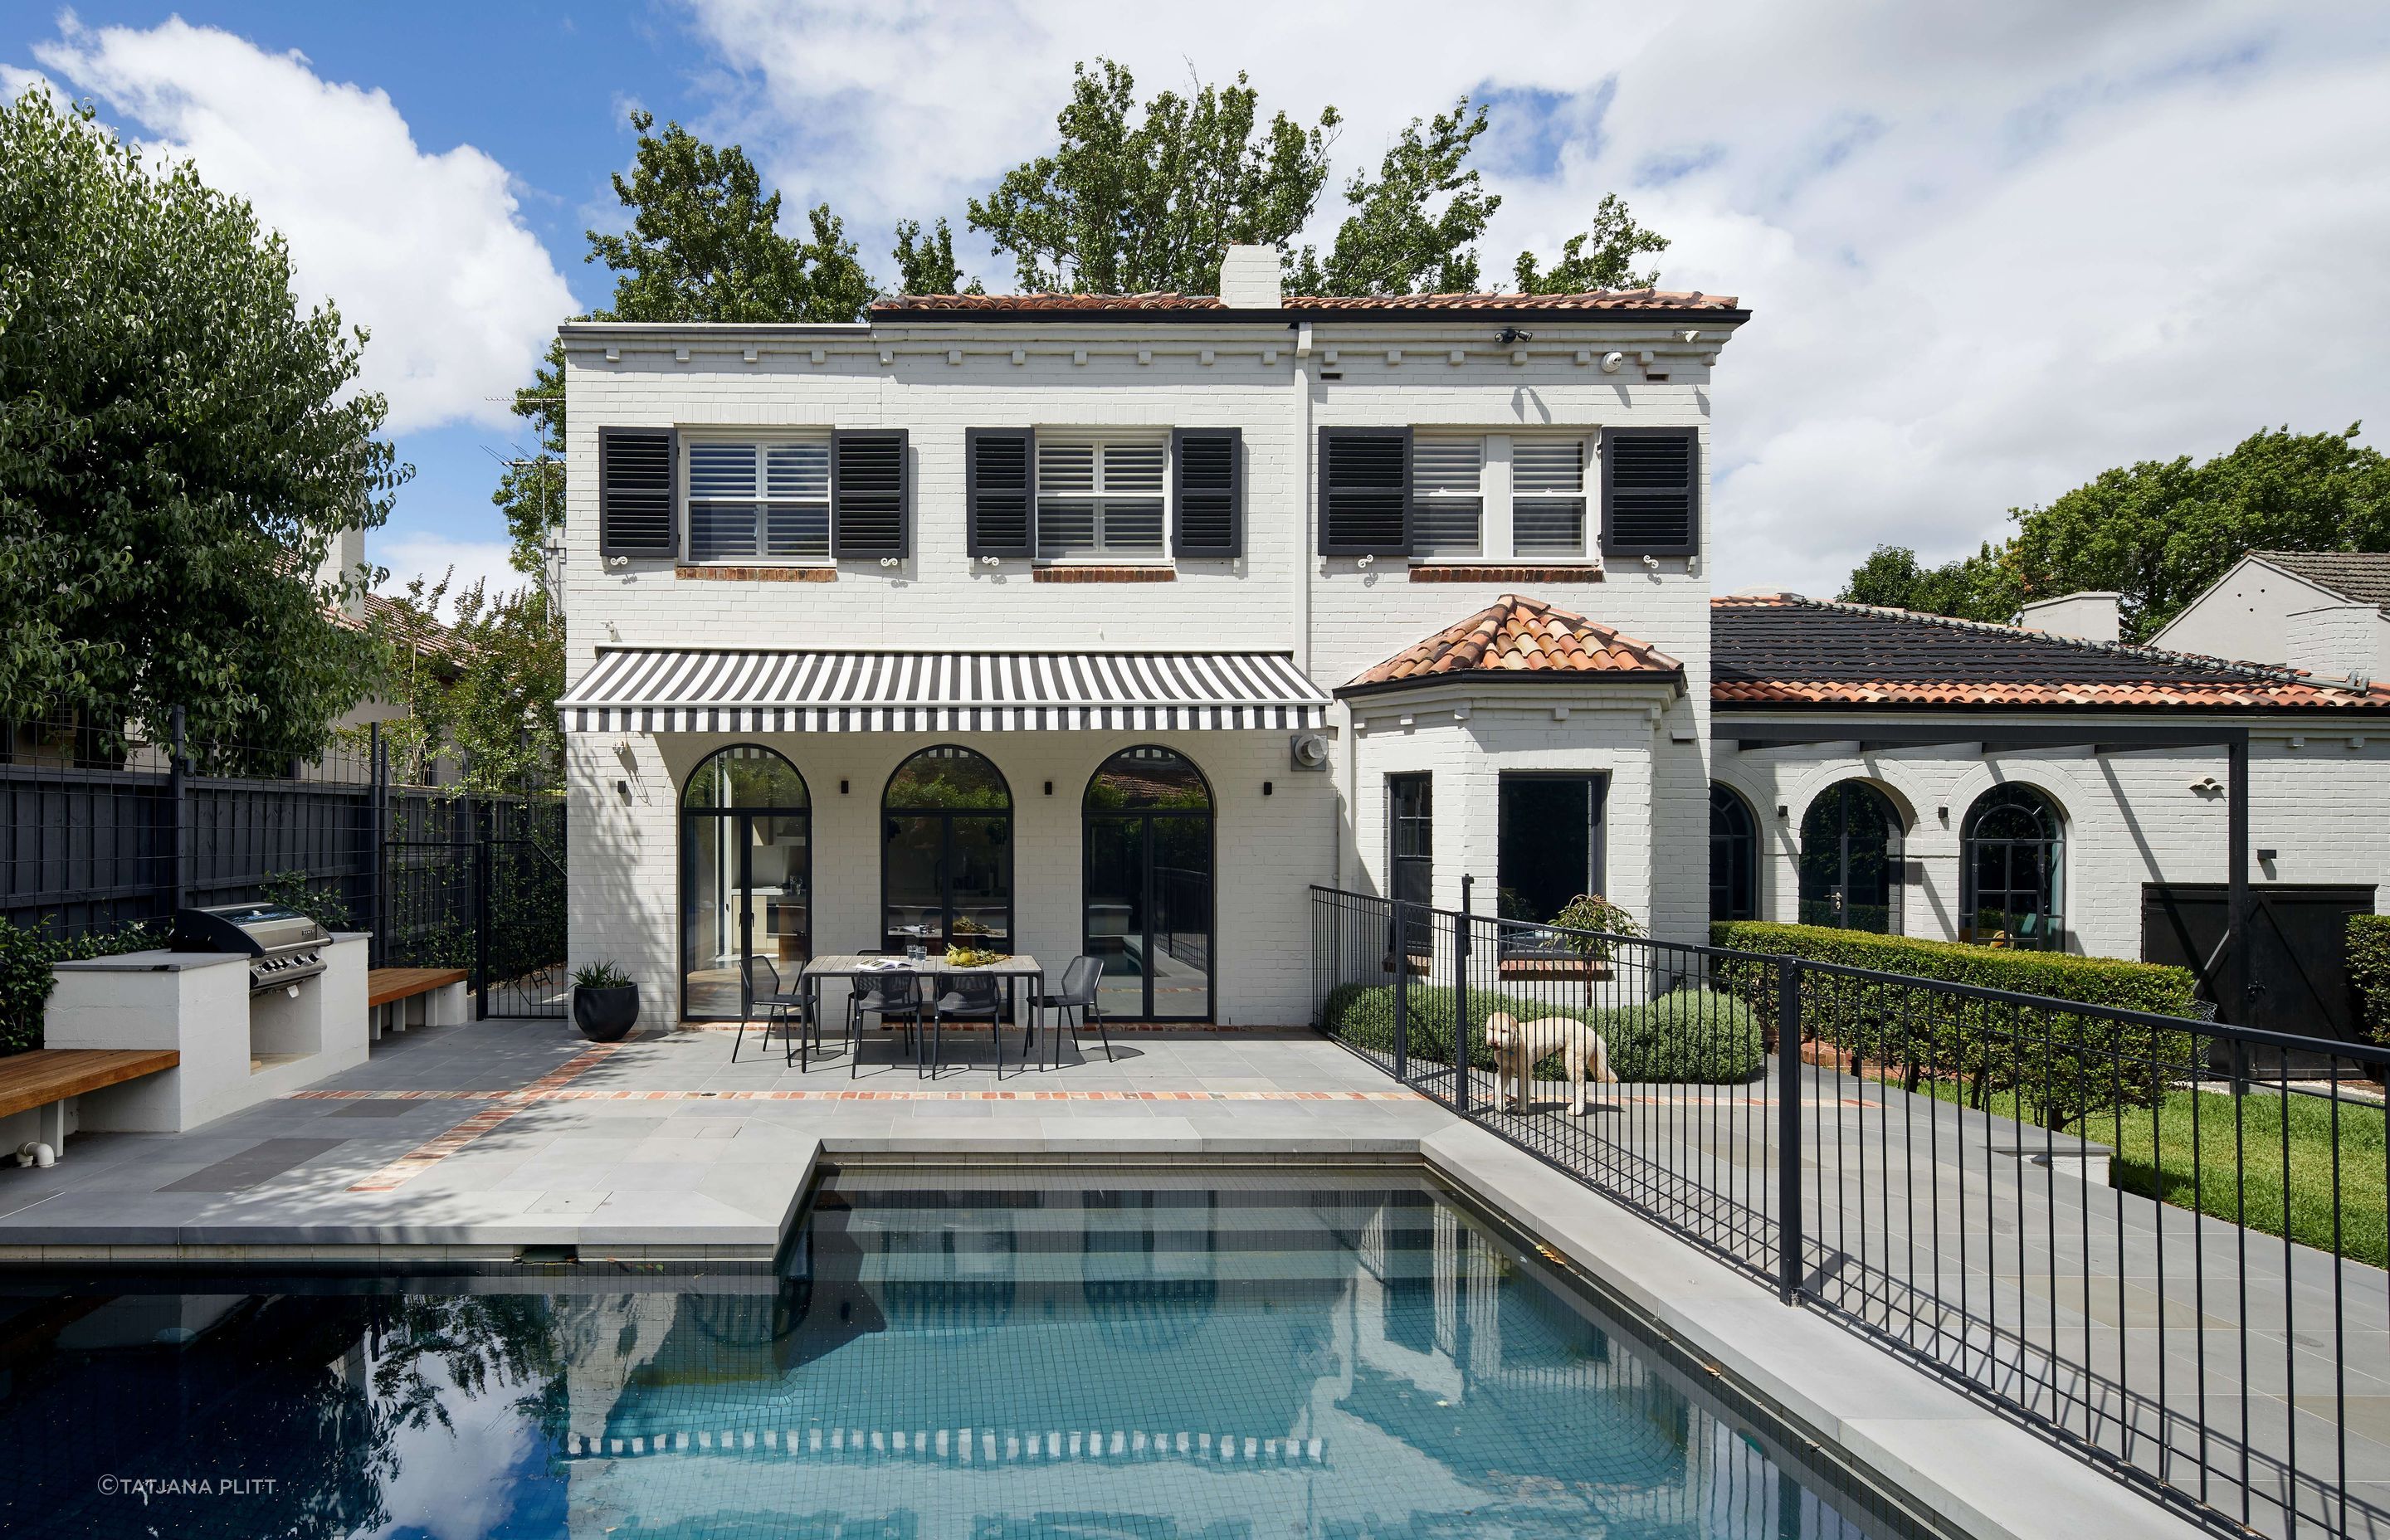 Art deco spanish mission house from the 1930’s renovated with updated paint with charcoal shutters. Rear space off kitchen features black and white striped awning, from Docril. See more from our Arch Deco Project.